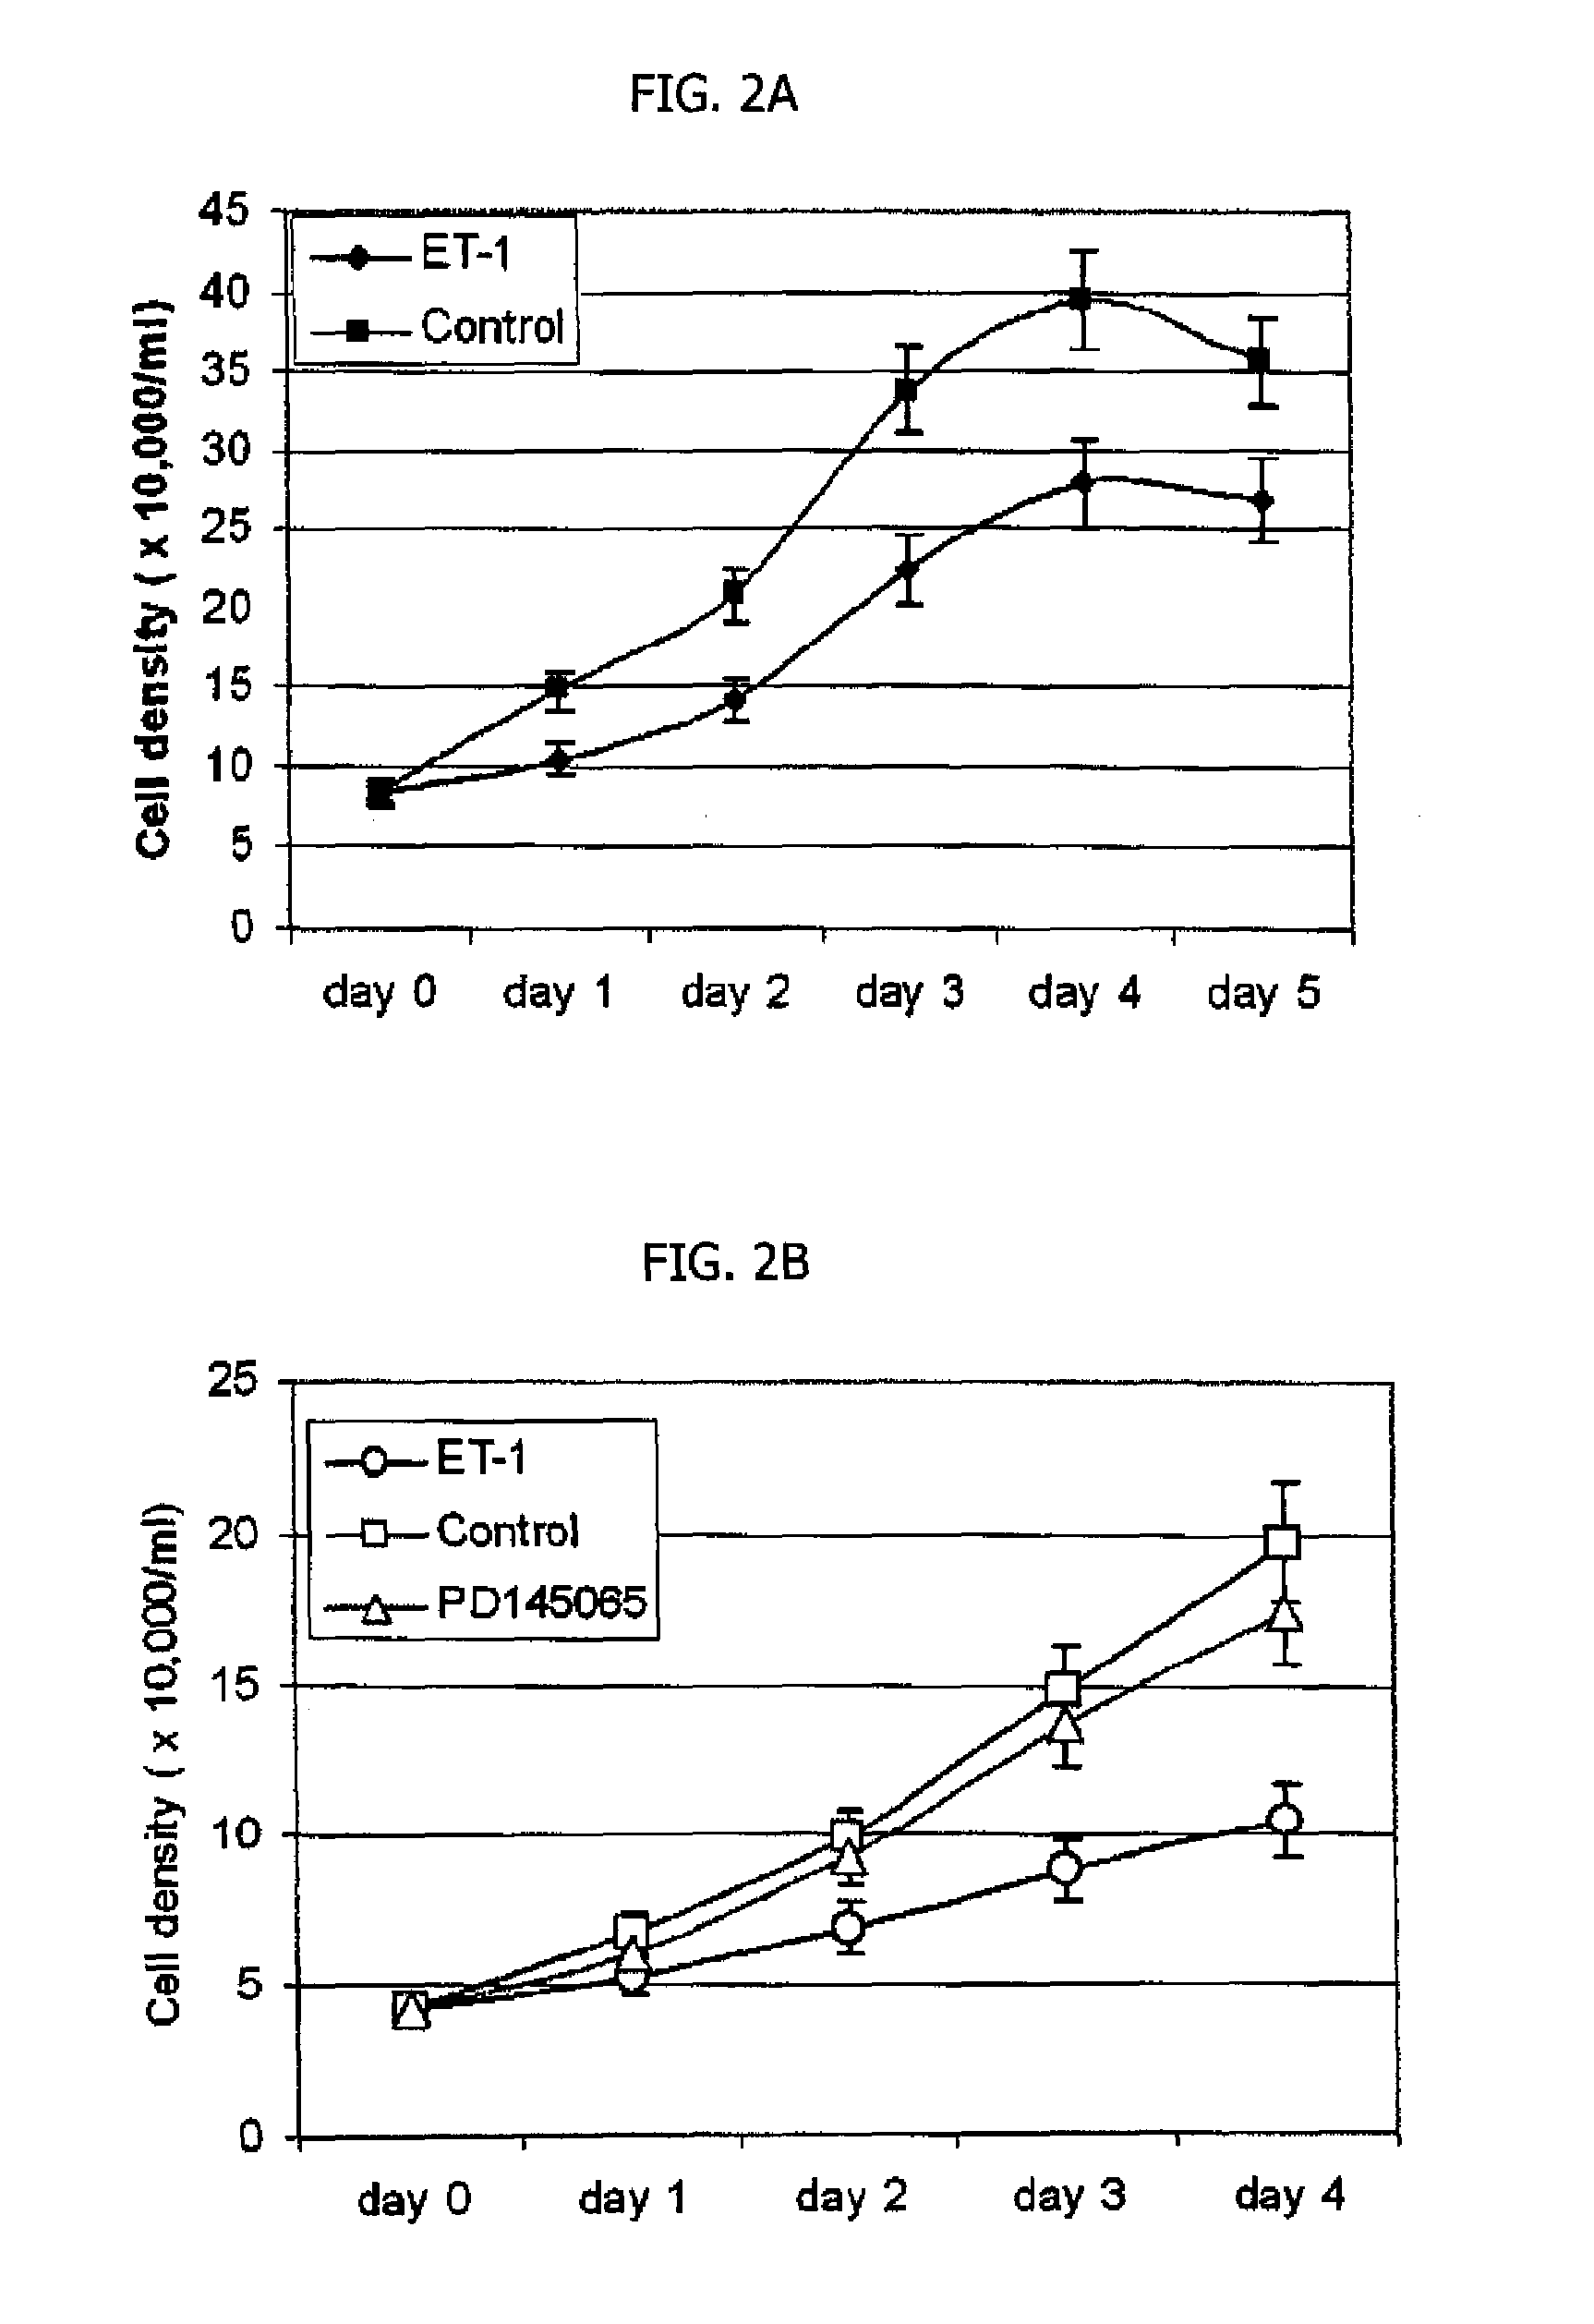 Method of diagnosing and treating interstitial cystitis